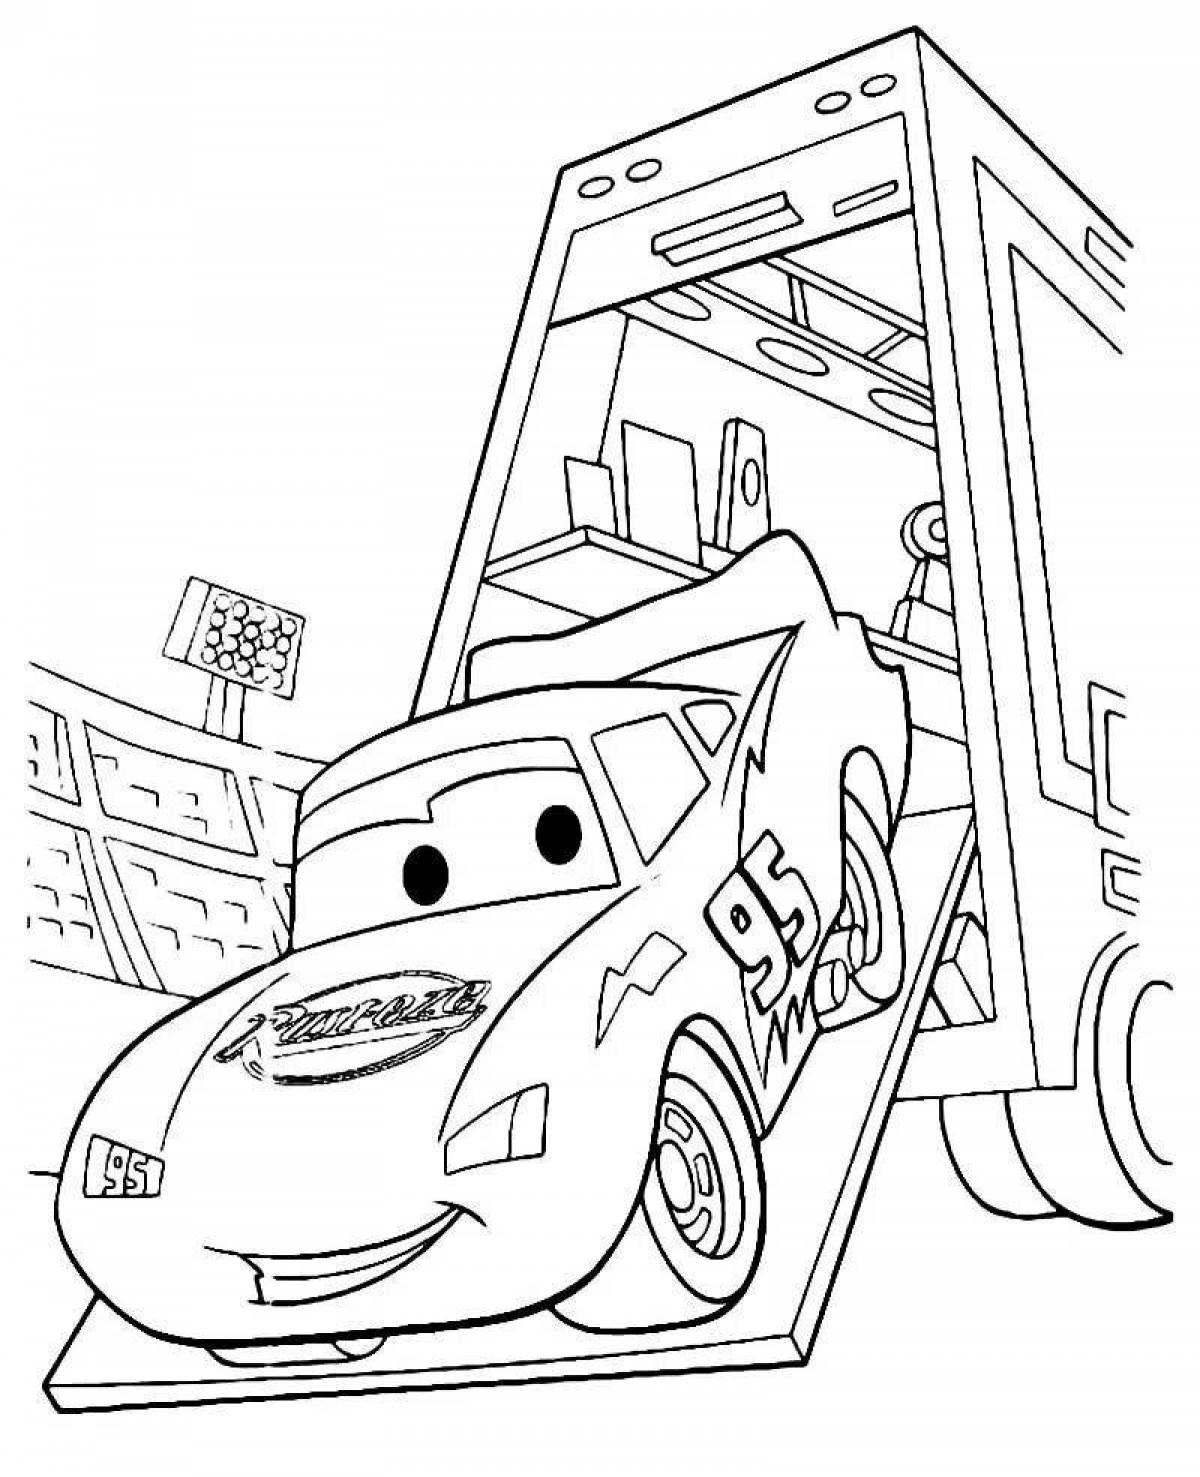 Charming cars mcqueen coloring book